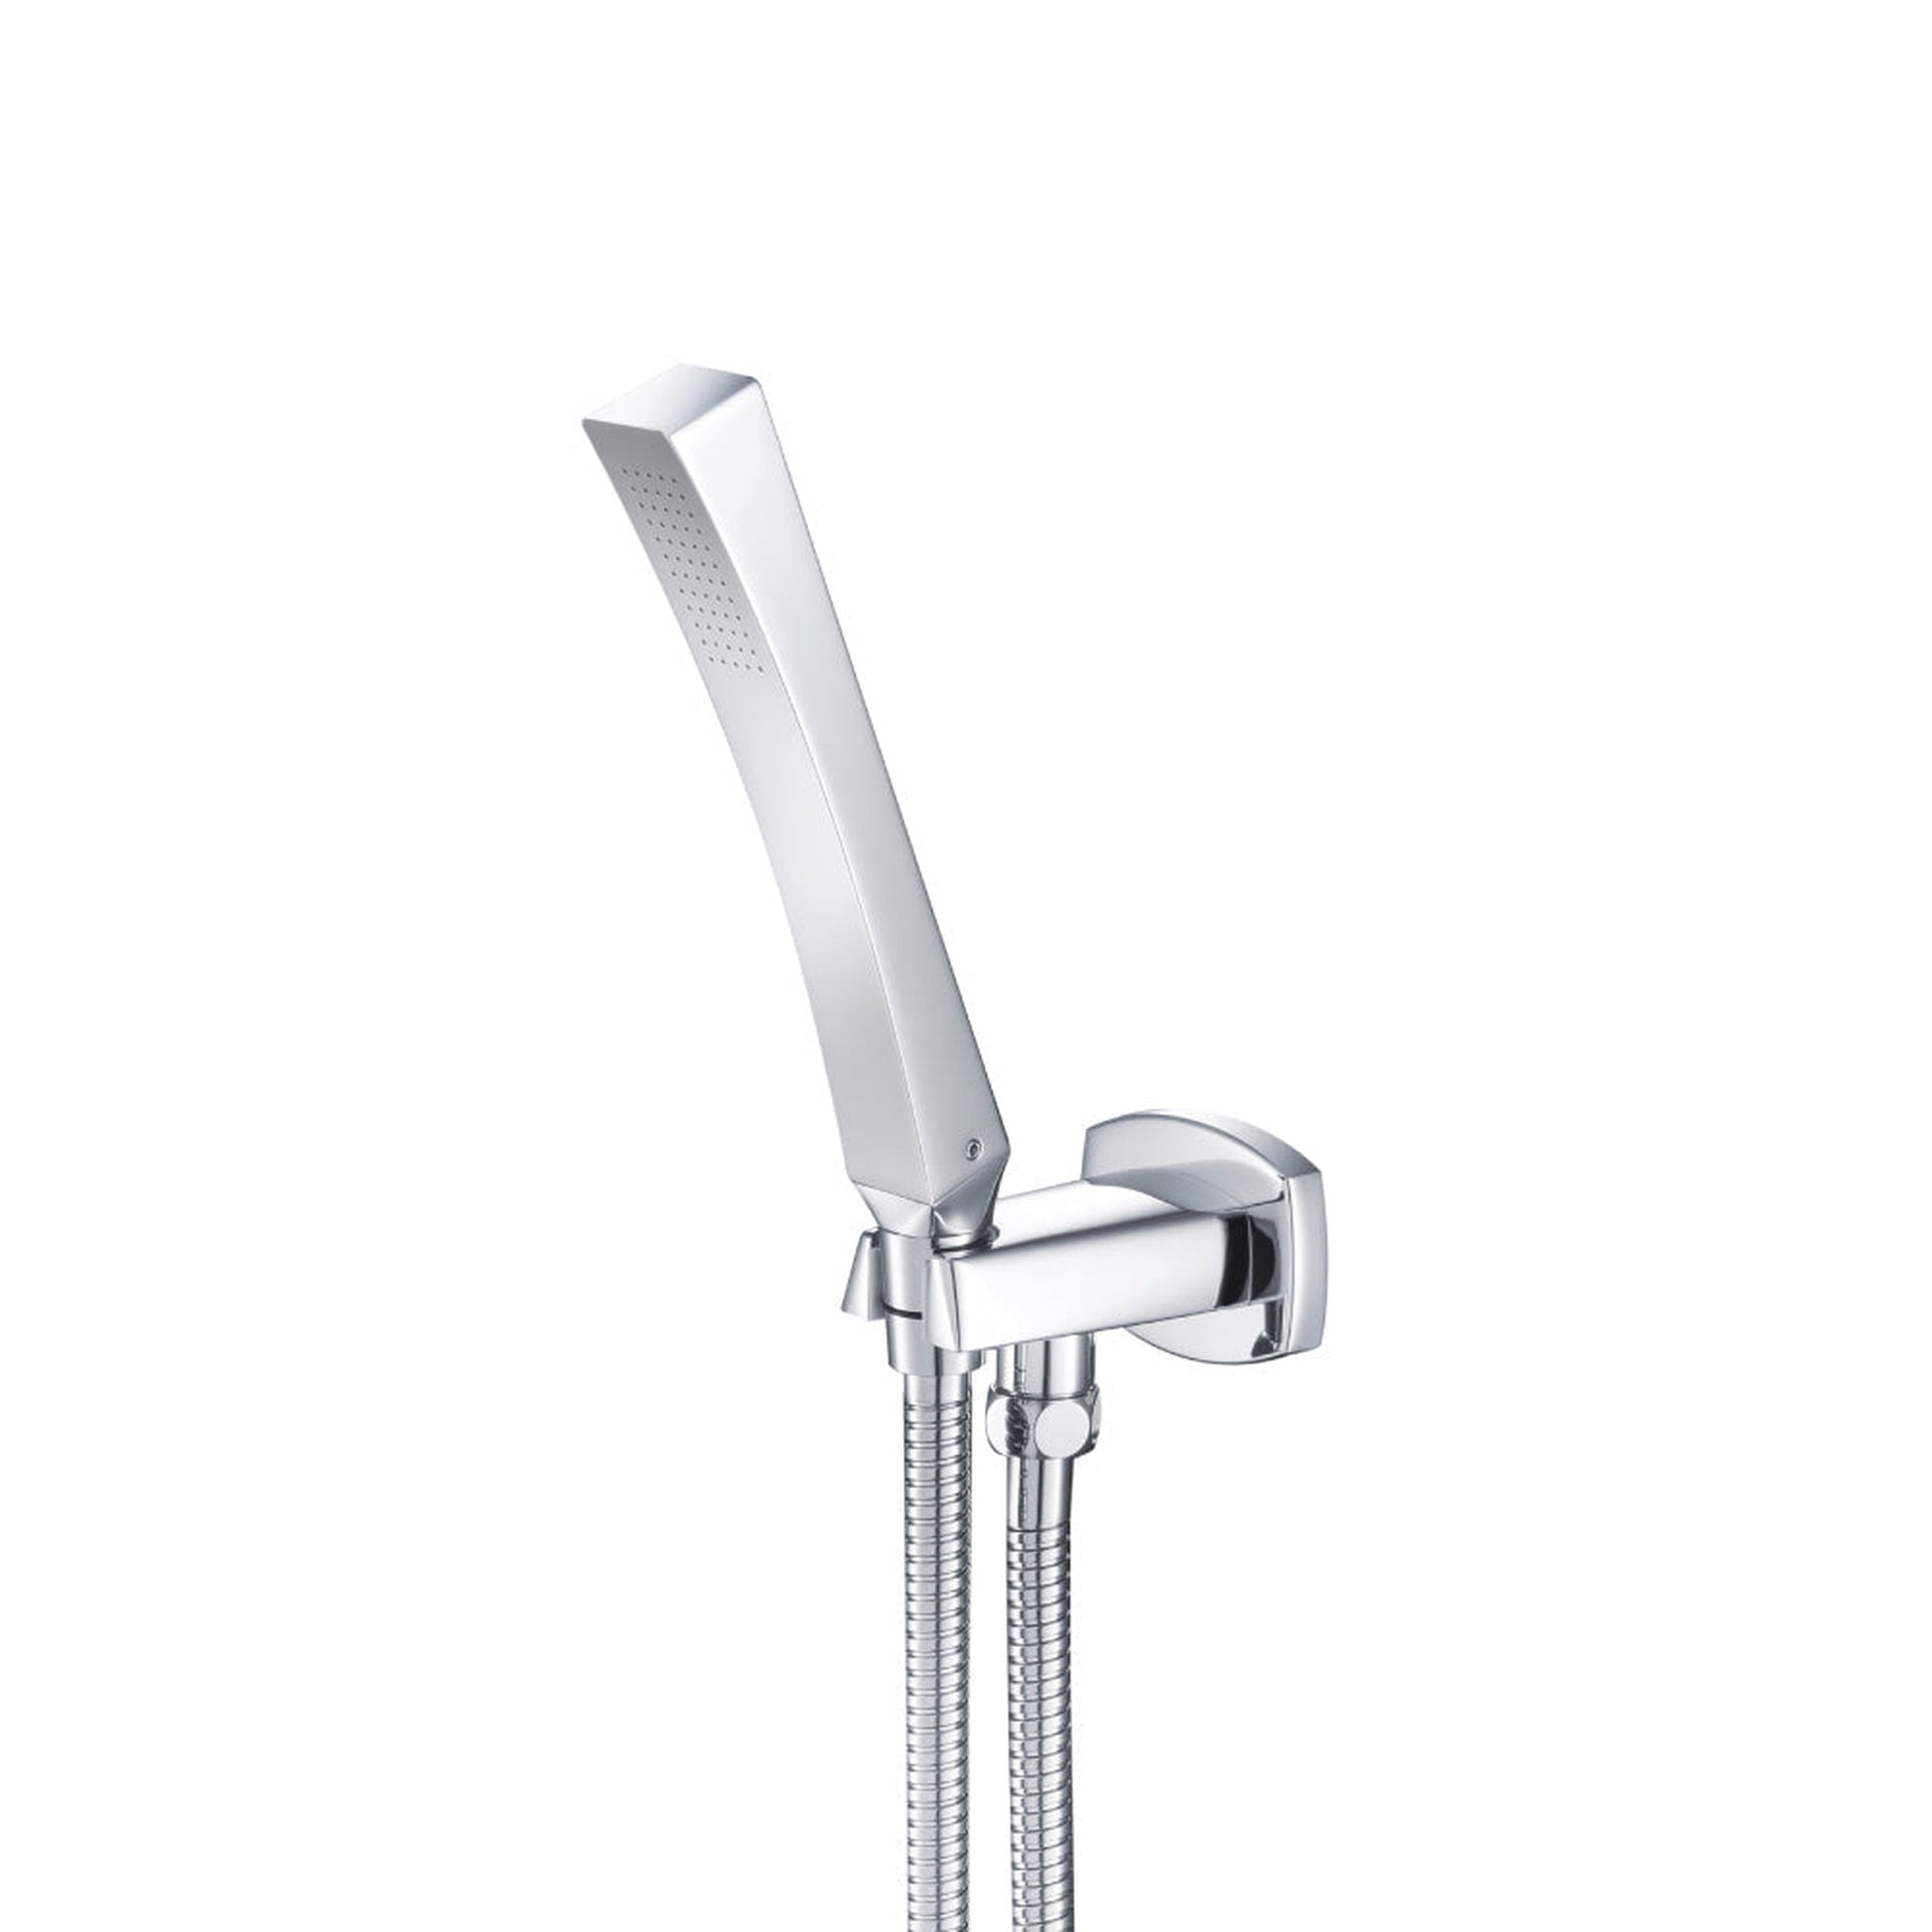 Isenberg Universal Fixtures Hand Shower Set With Wall Elbow, Holder and Hose in Polished Nickel (240.1026PN)